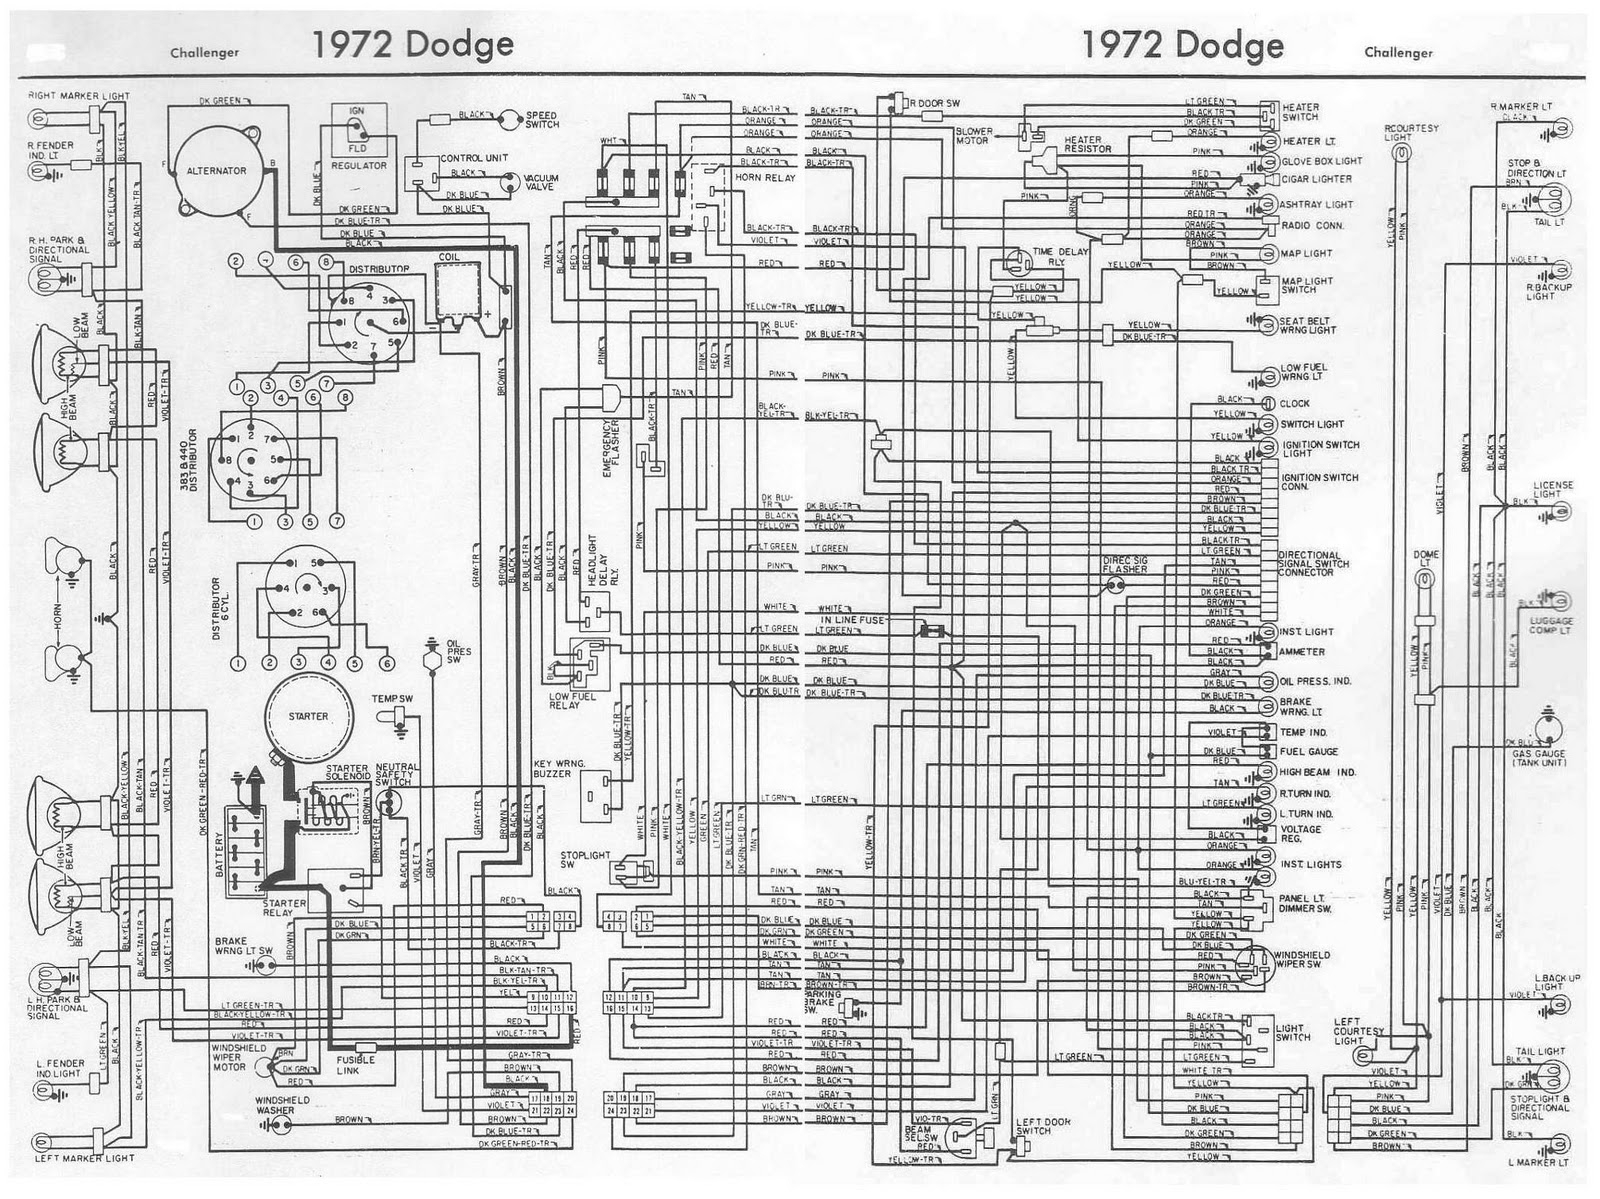 DIAGRAM 1972 Dodge Challenger Wiring Diagram FULL Version HD Quality